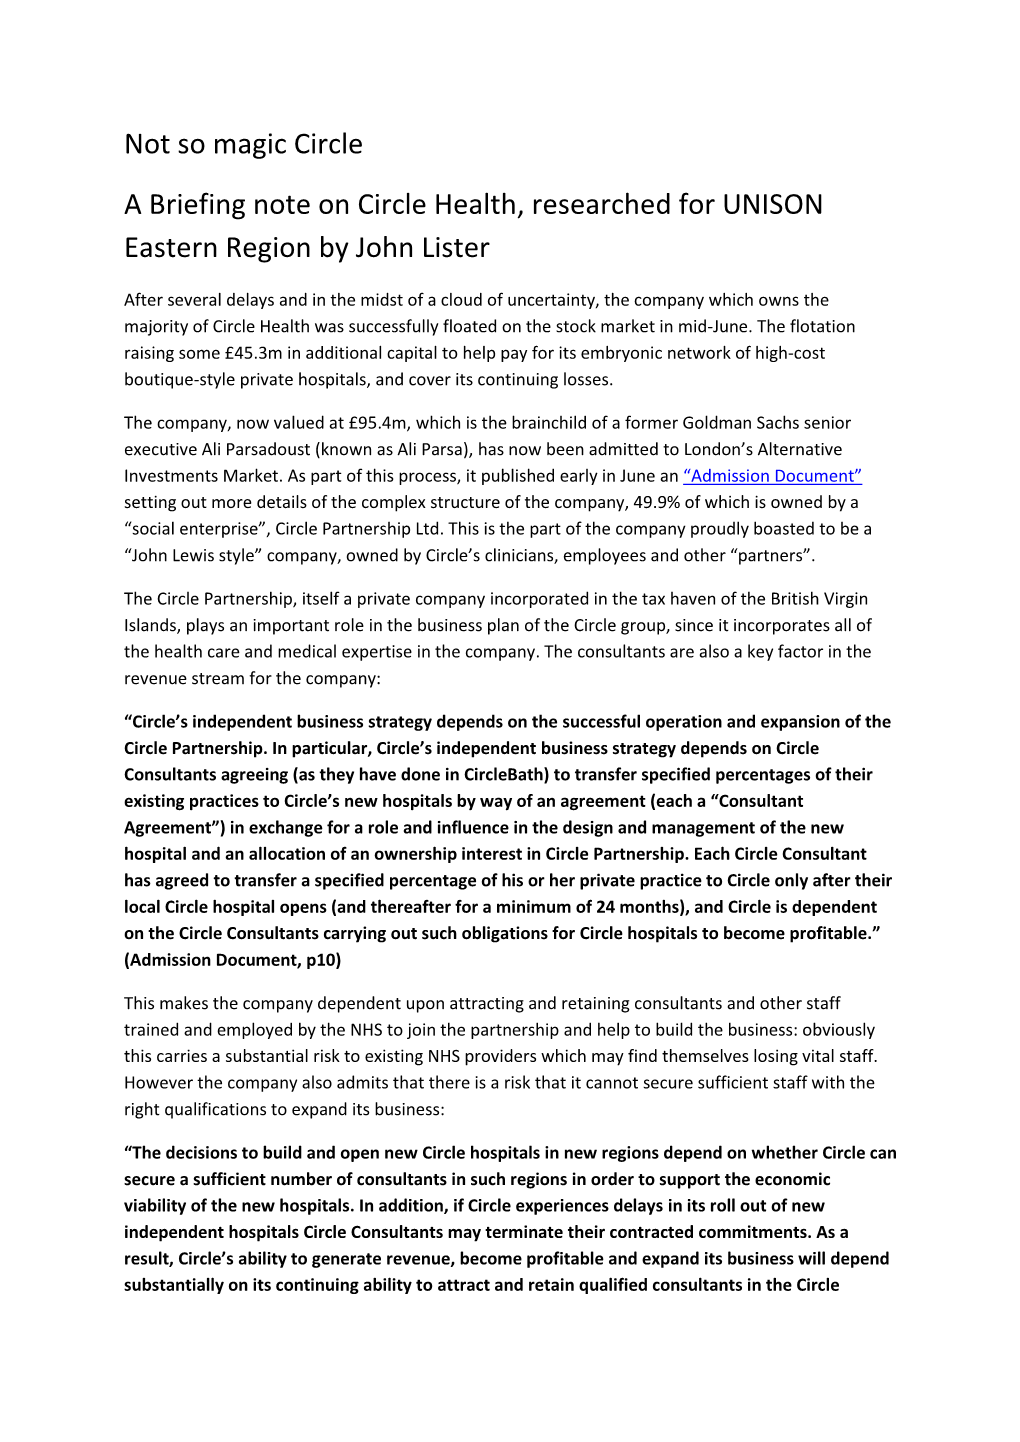 Circle a Briefing Note on Circle Health, Researched for UNISON Eastern Region by John Lister